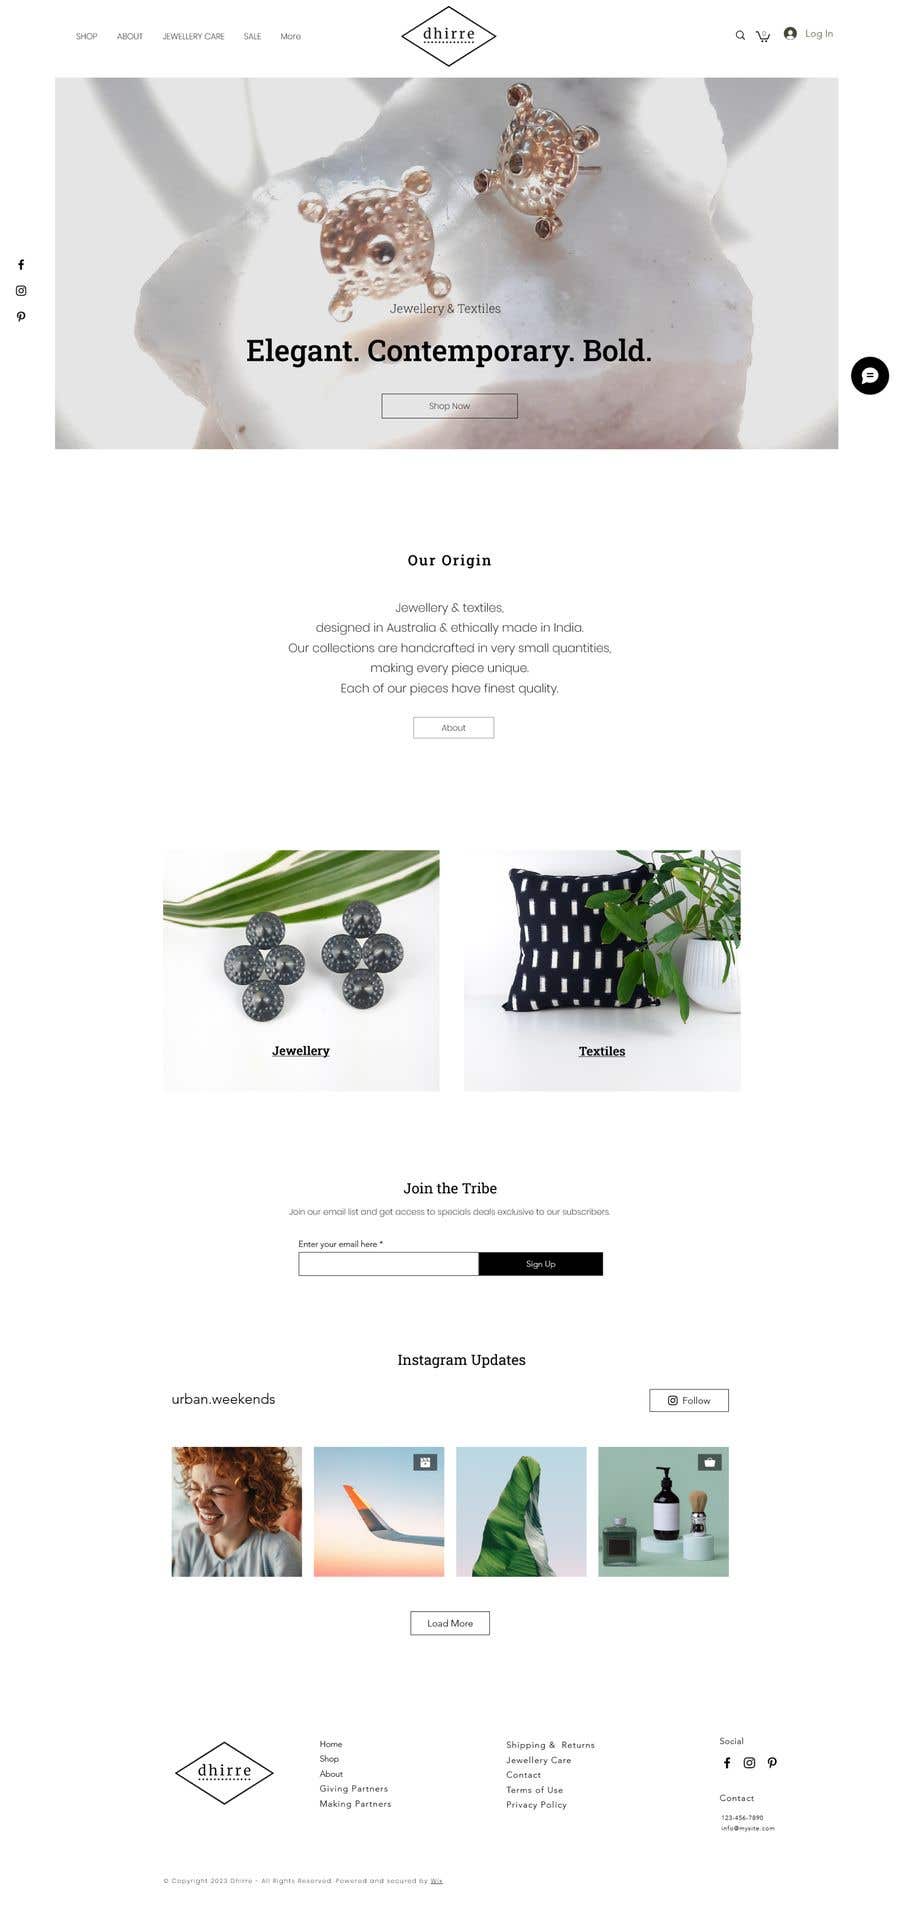 the homepage of the ecommercecommerce website with the homepage widget and product images